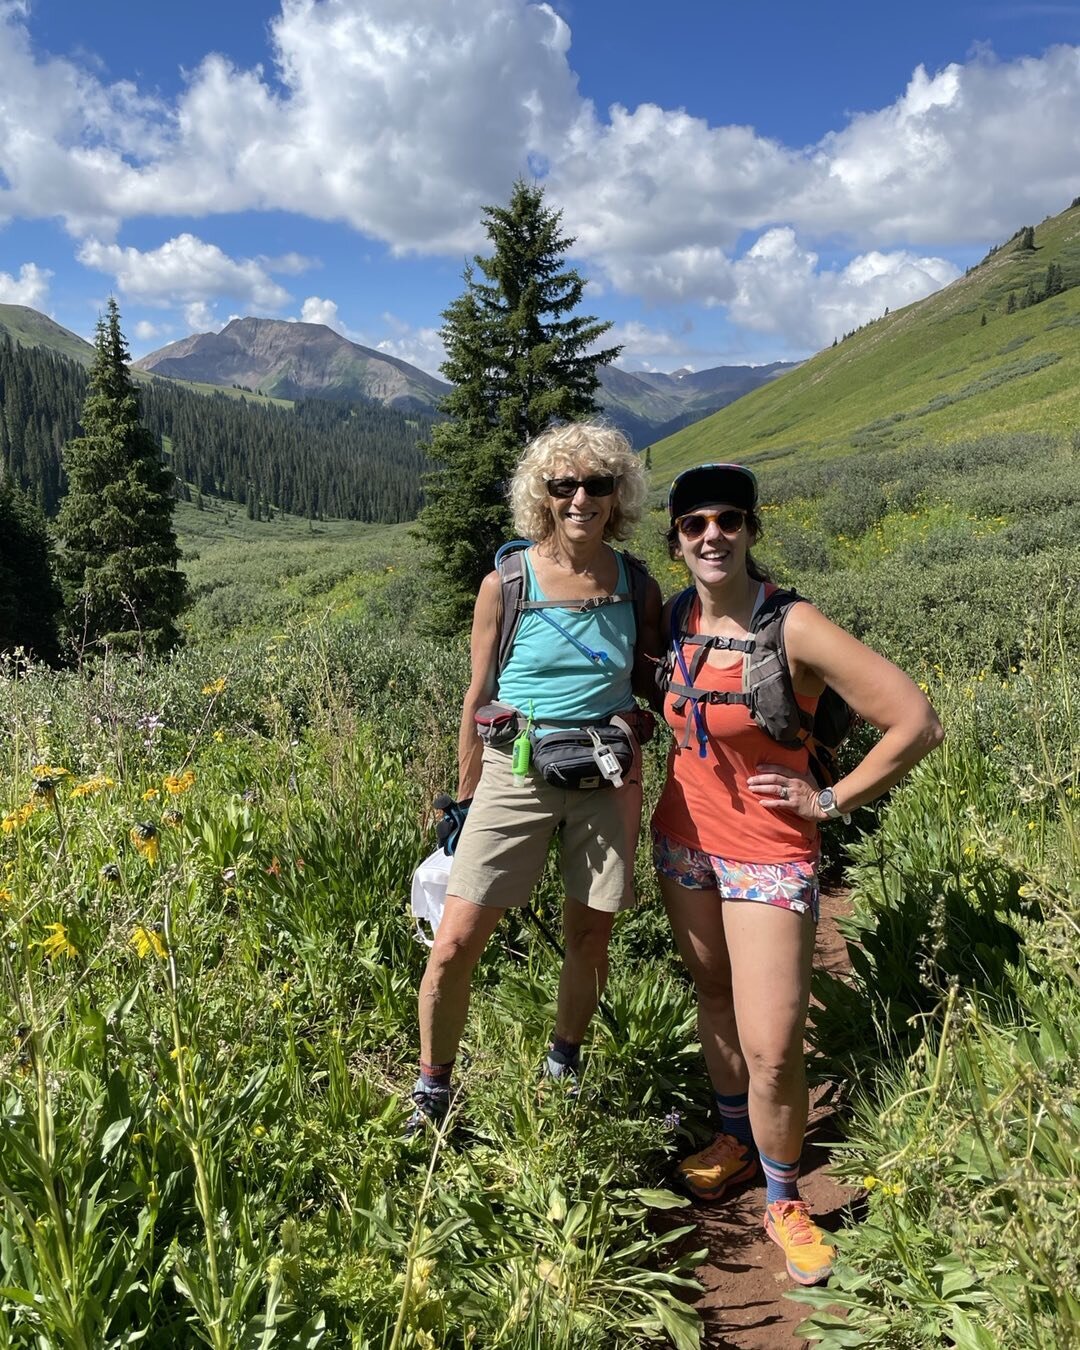 The hiking and wildflowers ( and keeping up with daughter) @kalasp were glorious